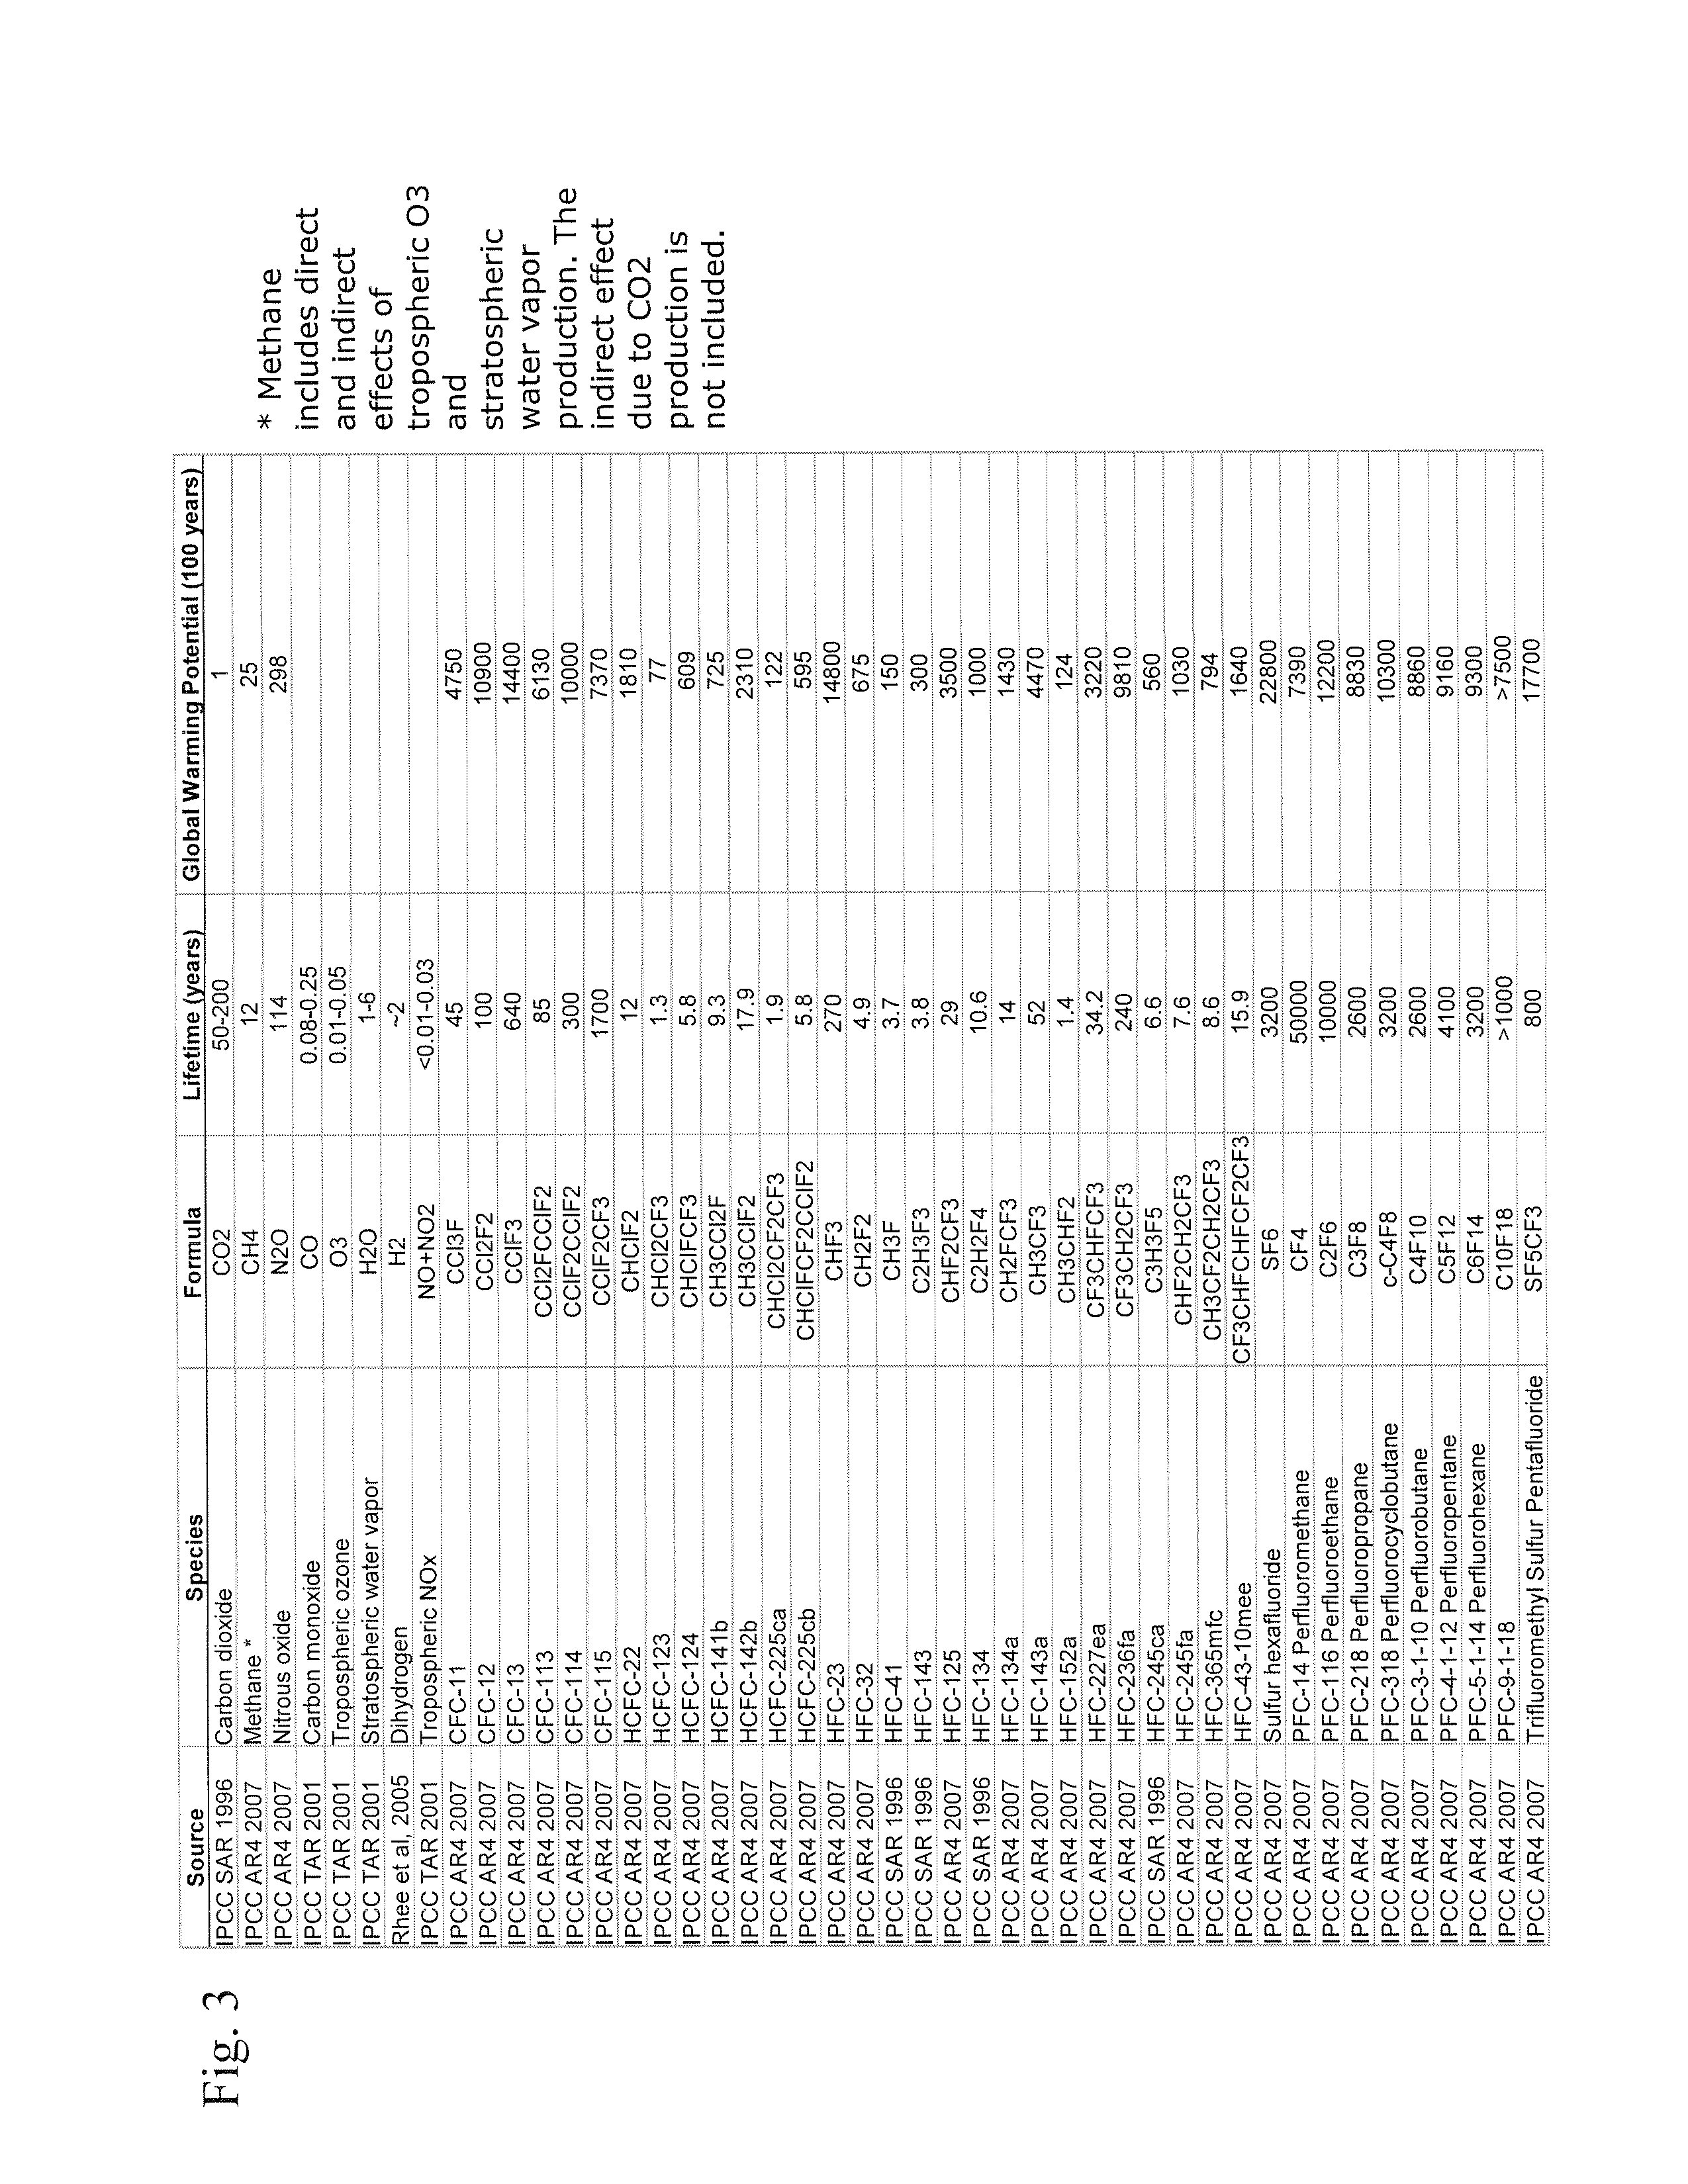 Method for measuring weekly and annual emissions of a greenhouse gas over a given surface area